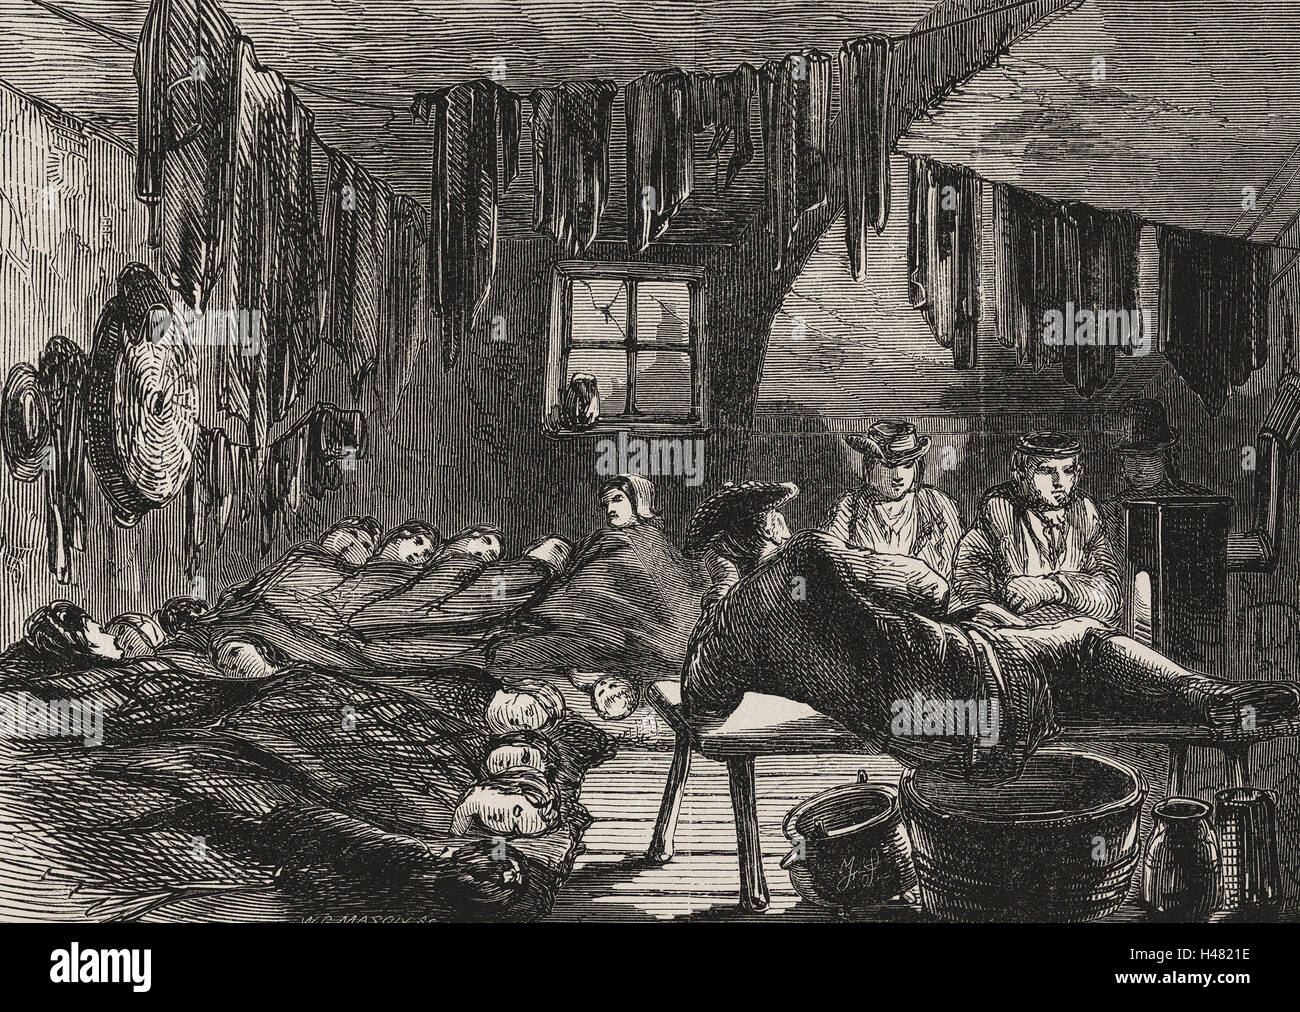 Illustration depicting cramped and squalid housing conditions Stock Photo